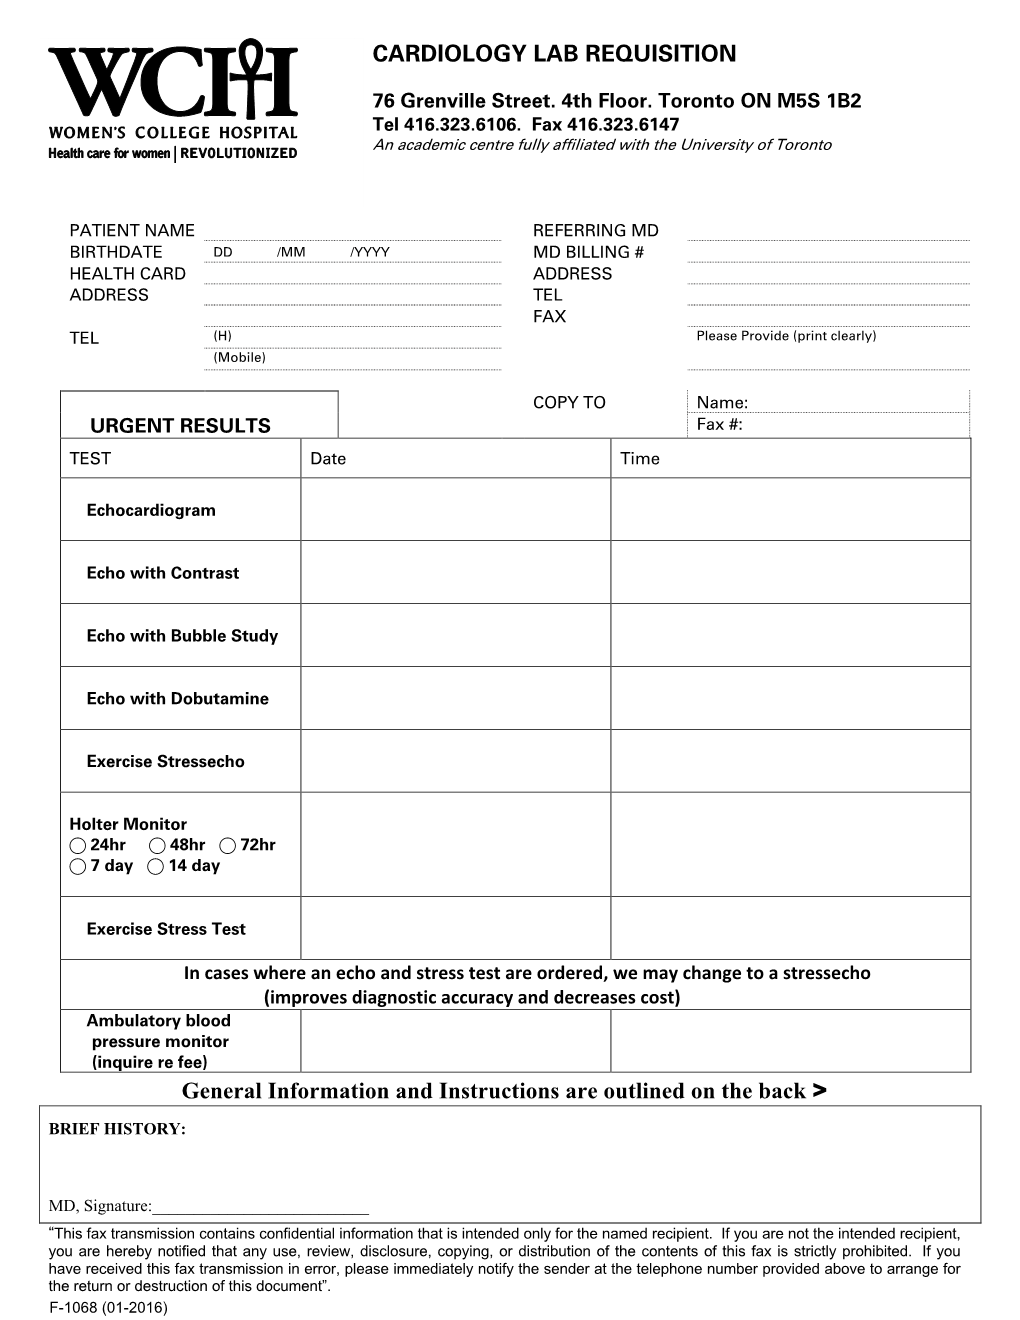 Cardiology Lab Requisition